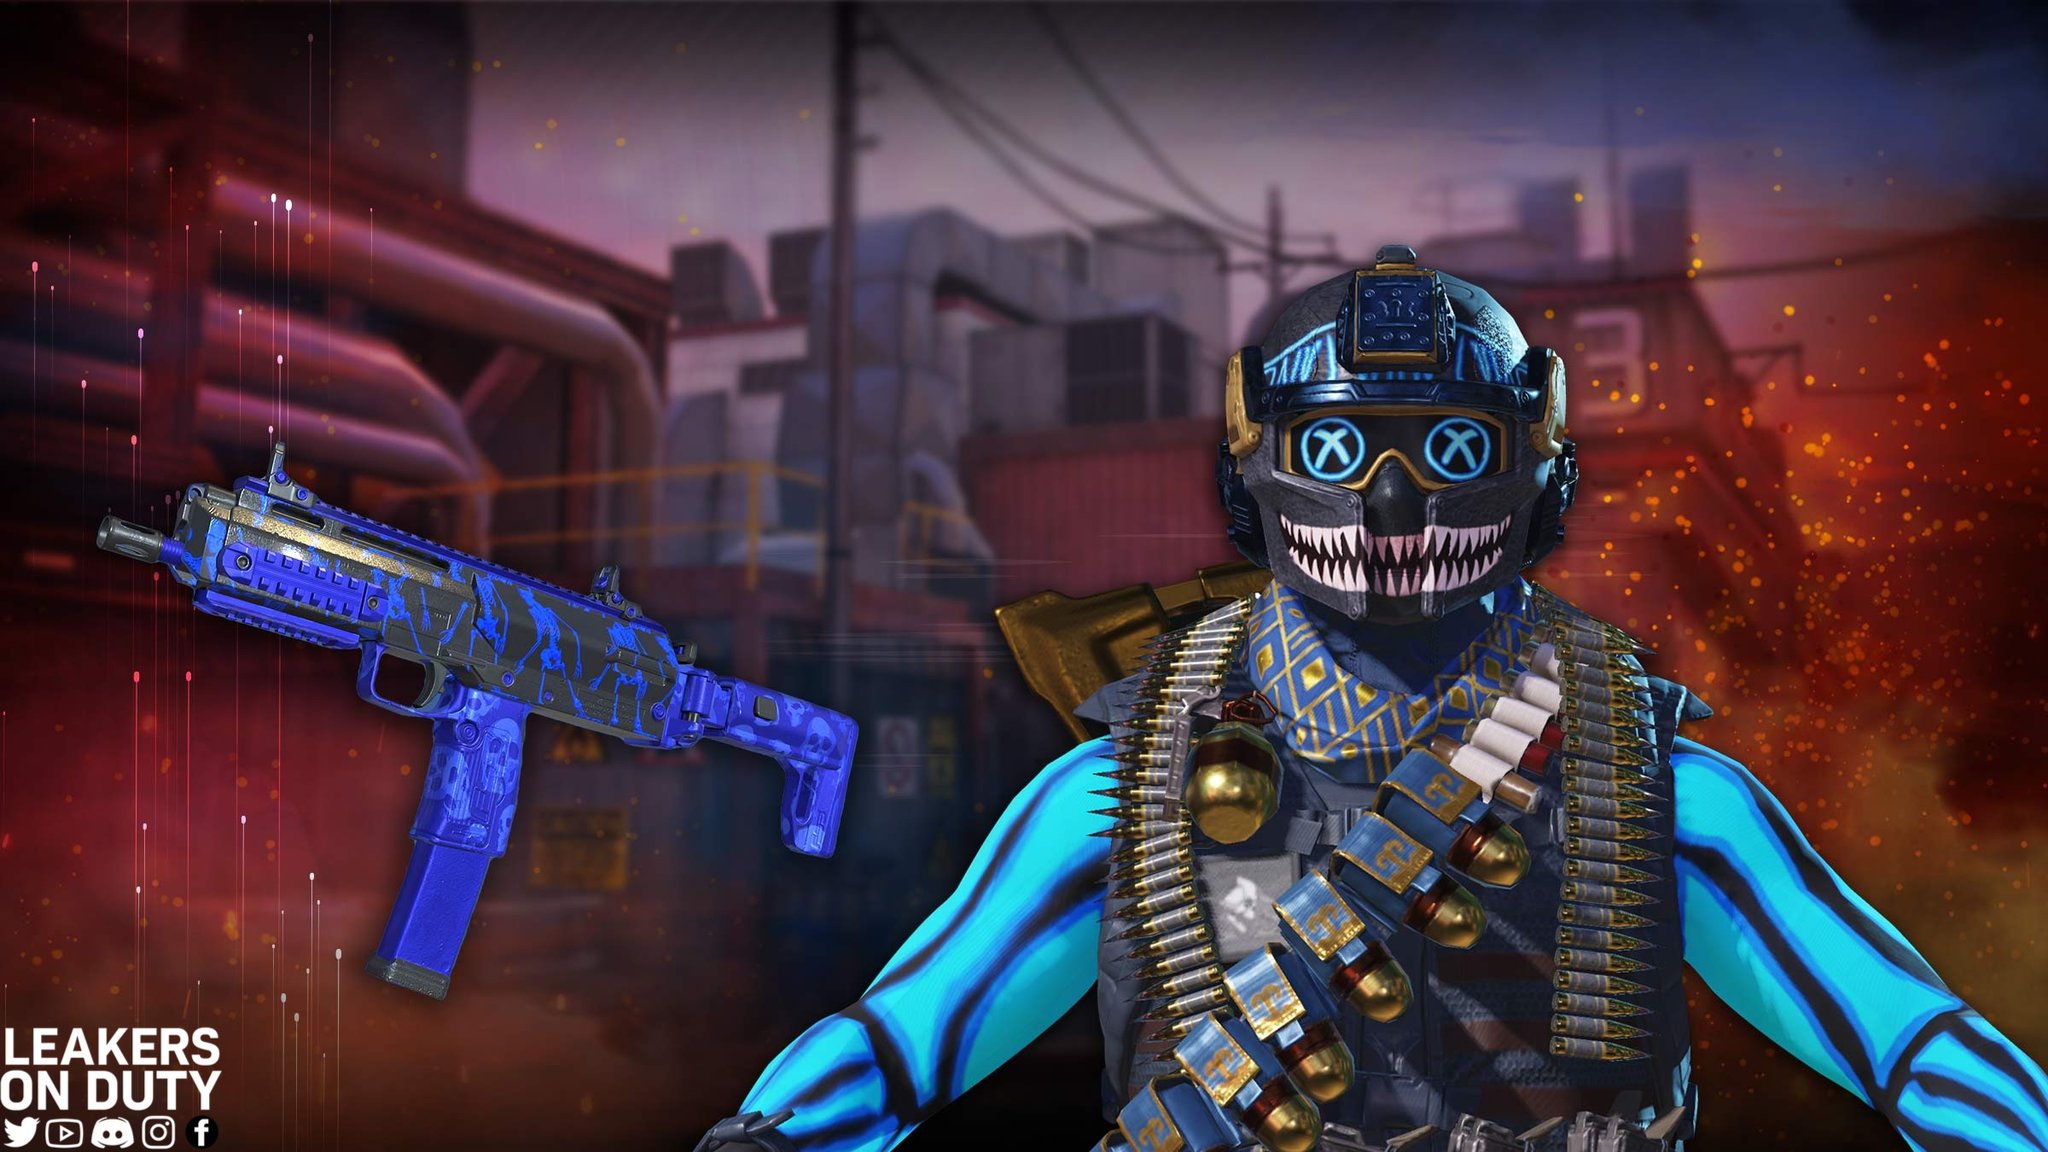 Leakers On Duty on X: Free with  Prime Gaming Bundle - Battle  Hardened Neon Fire expires tomorrow. Items included: ] QXR  Blue  Skeletons ] Battle Hardened Neon Fire Operator Skin